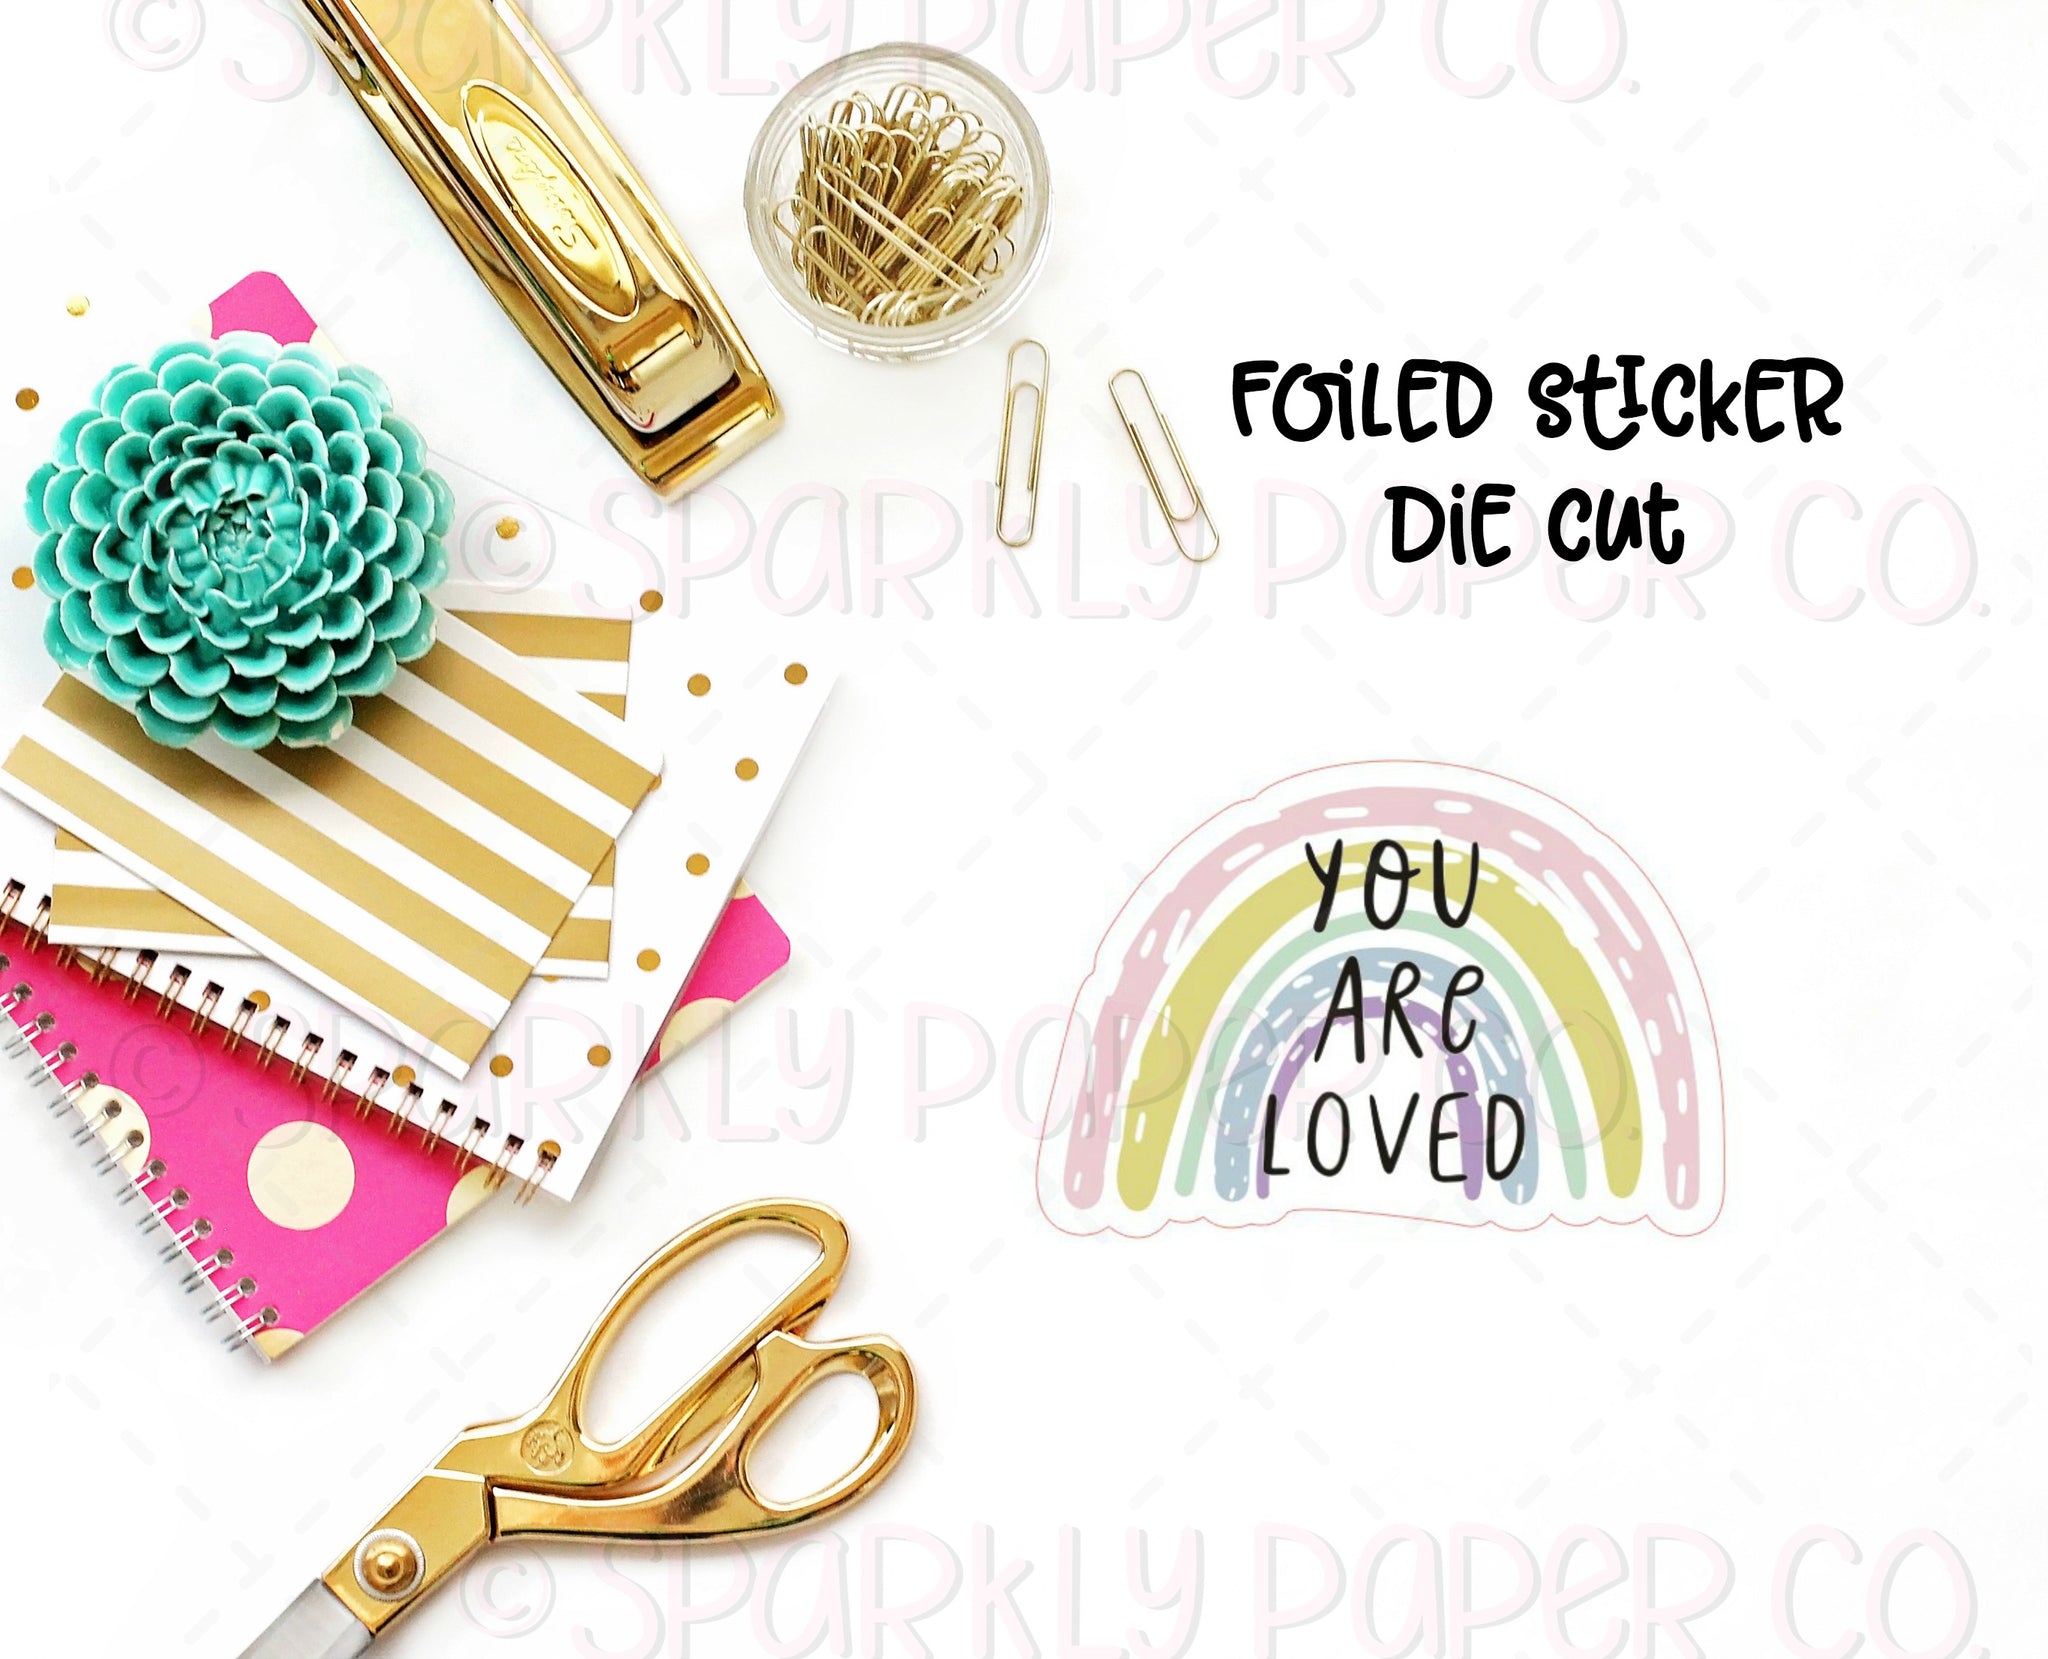 You Are Loved FOILED Sticker Die Cut